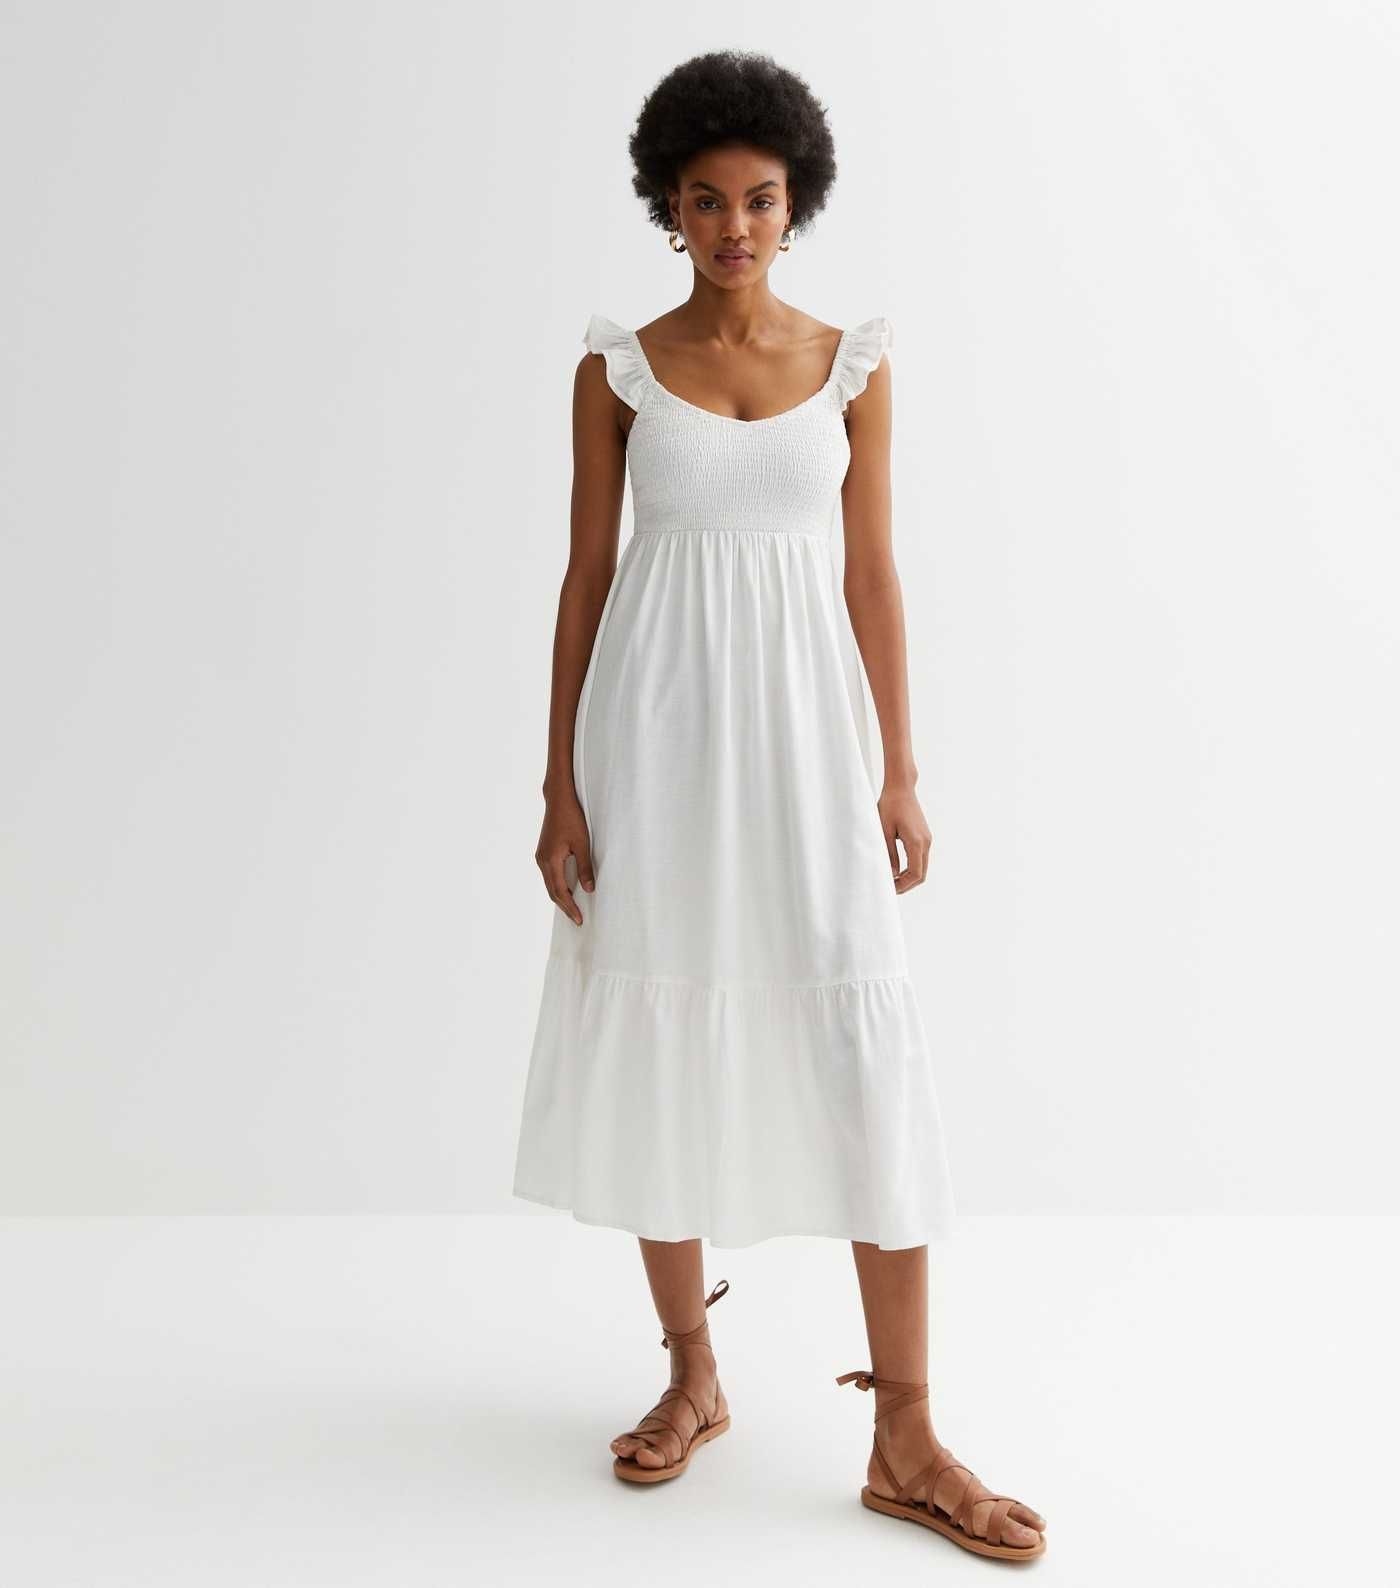 White Shirred Frill Midi Dress
						
						Add to Saved Items
						Remove from Saved Items | New Look (UK)